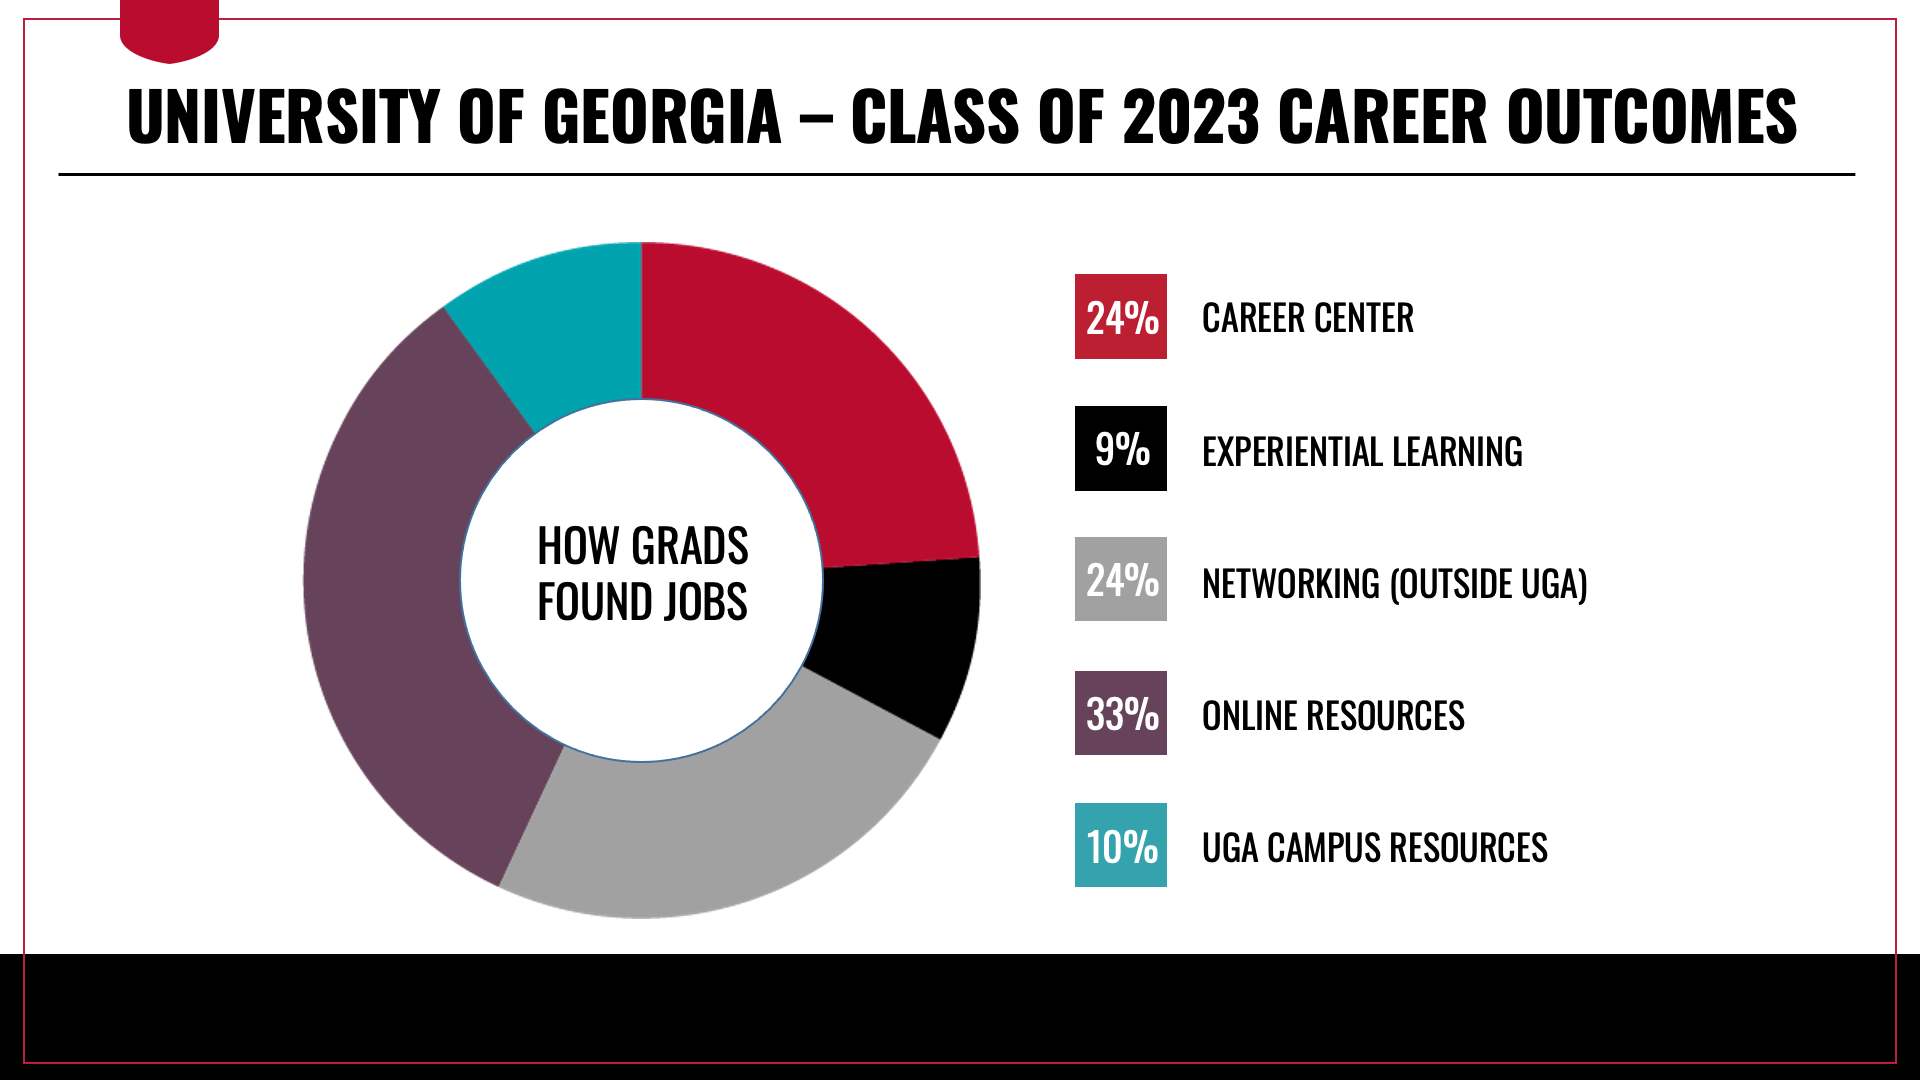 How UGA Class of 2023 graduates found jobs - 24% UGA Career Center - 9% Experiential Learning - 24% Networking outside UGA - 33% Online Resources - 10% UGA Campus Resources